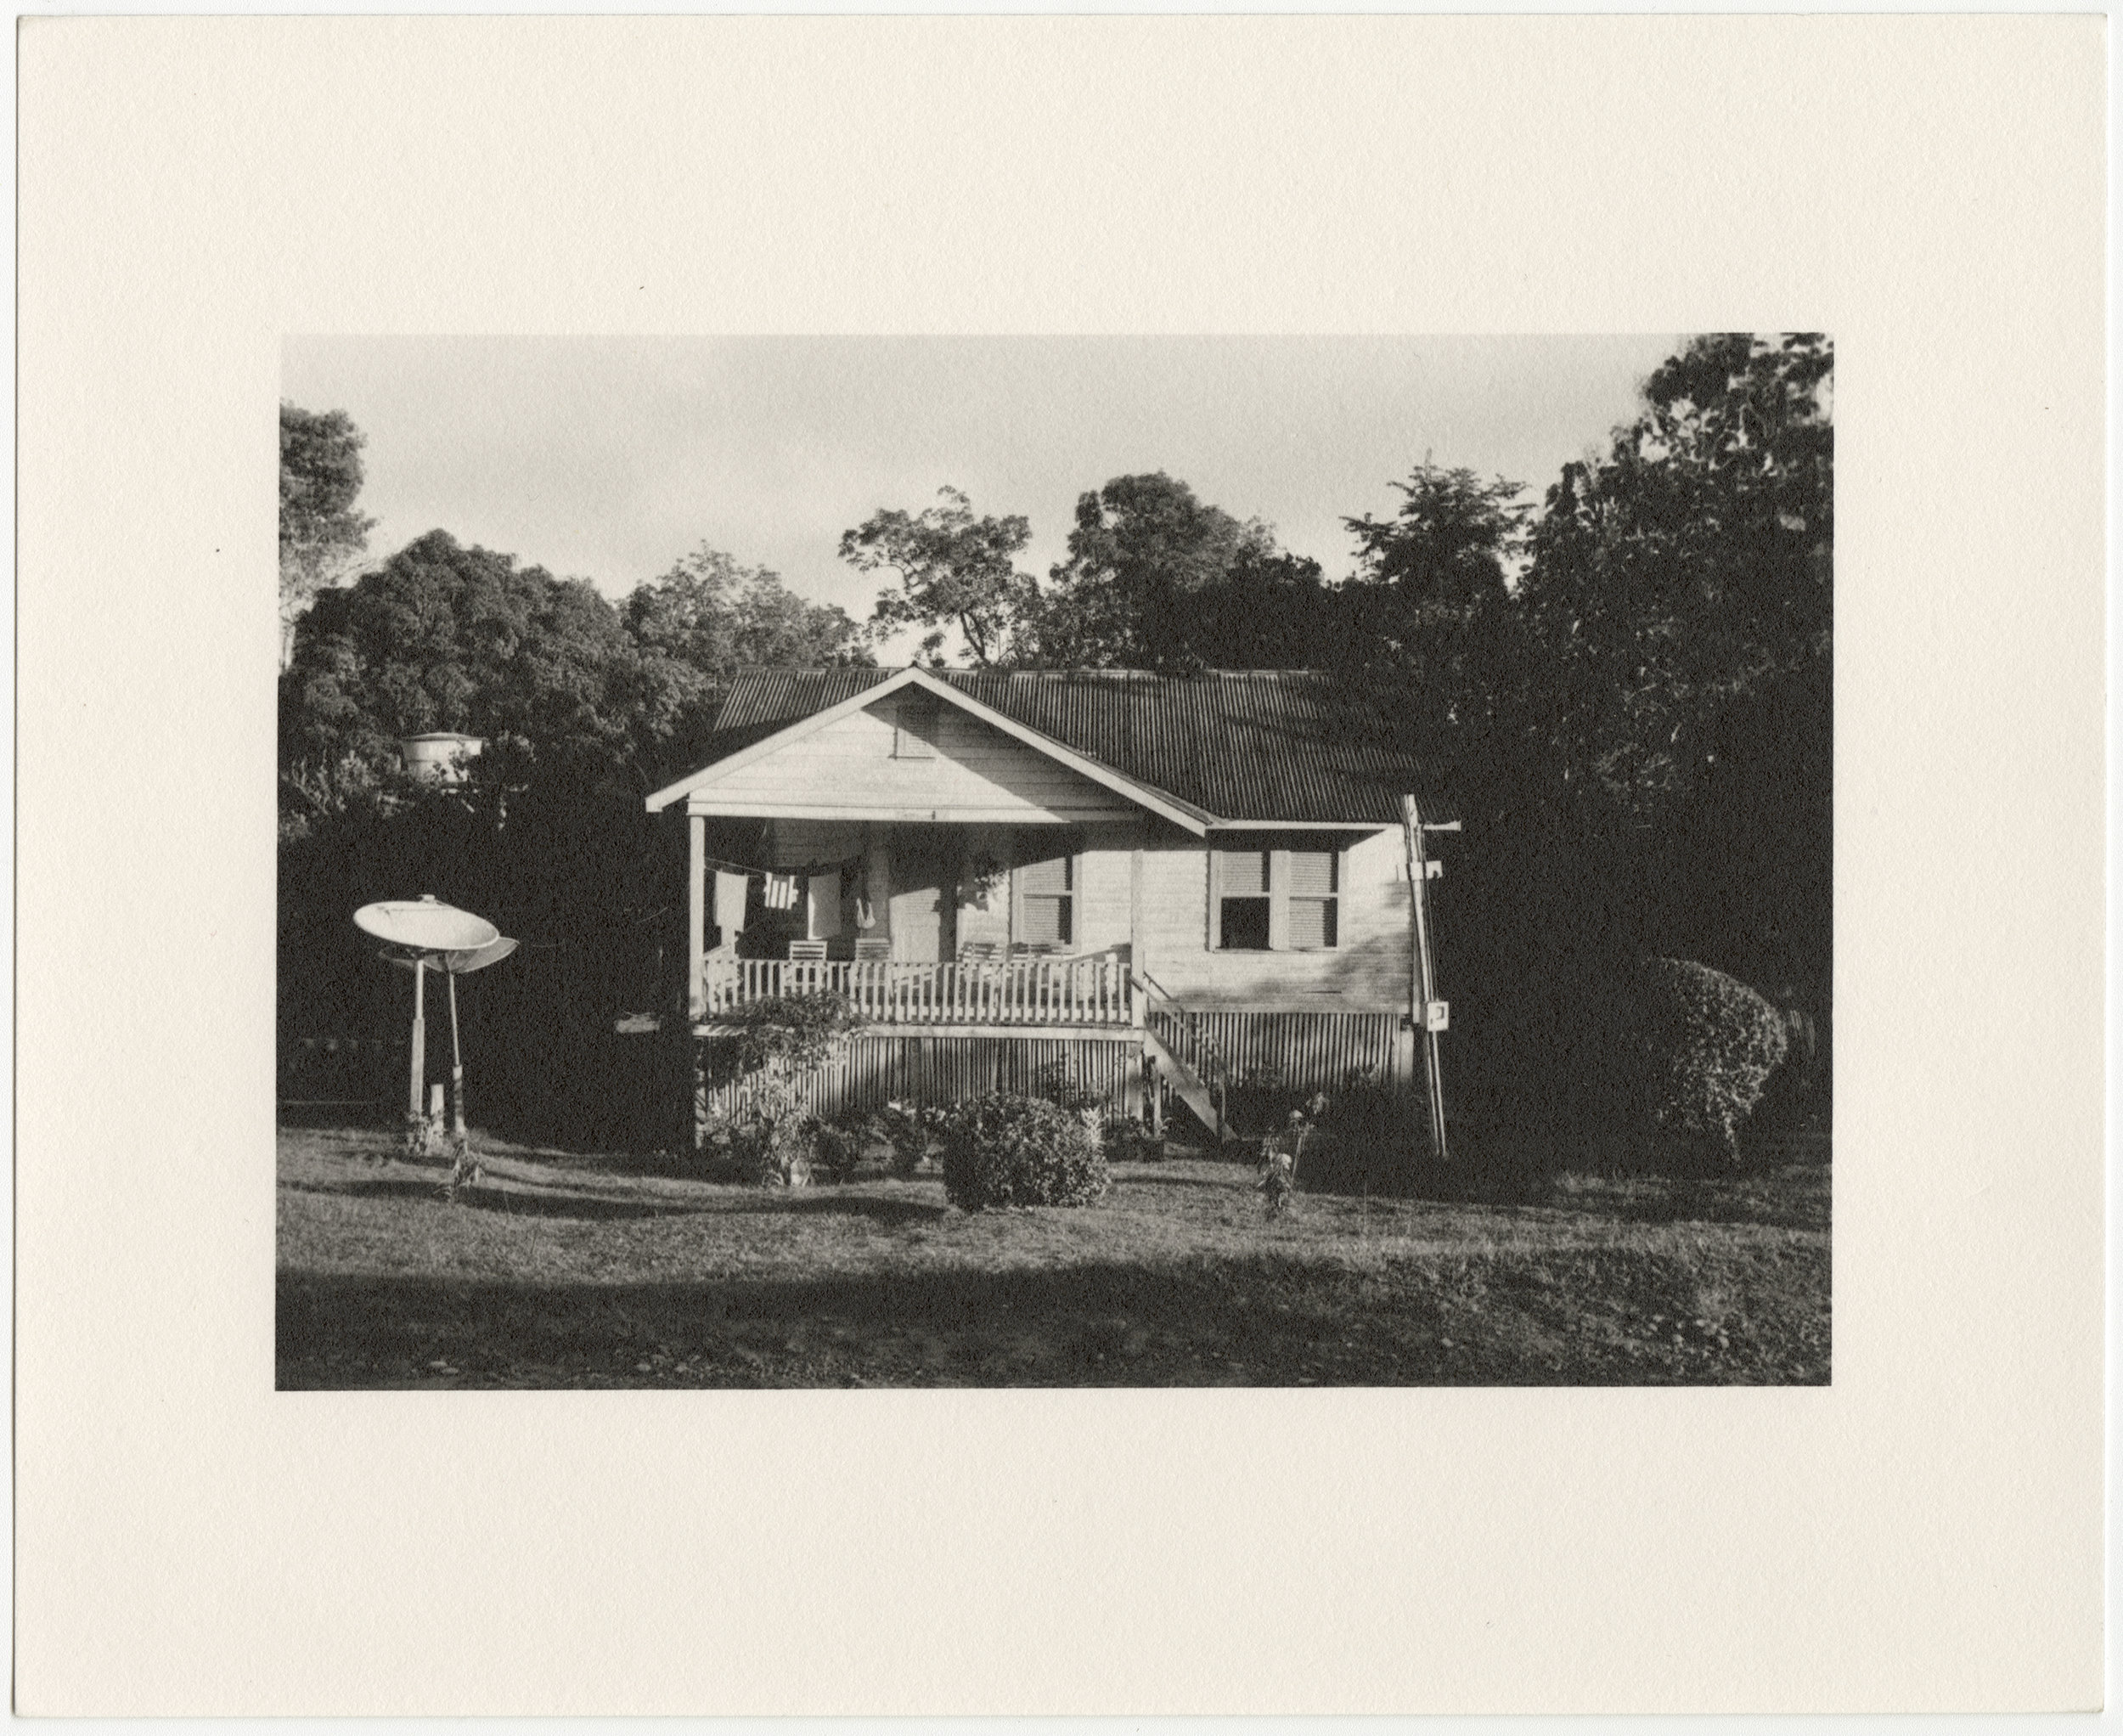  Fordlândia employee house with satellites, built in 1929-1933 by the Companhia Ford Industrial Do Brasil Ford Motor Company. 2014, Fordlândia, Pará, Brazil. Gelatin silver fiber print, 8” x 10”, 2014/2018 